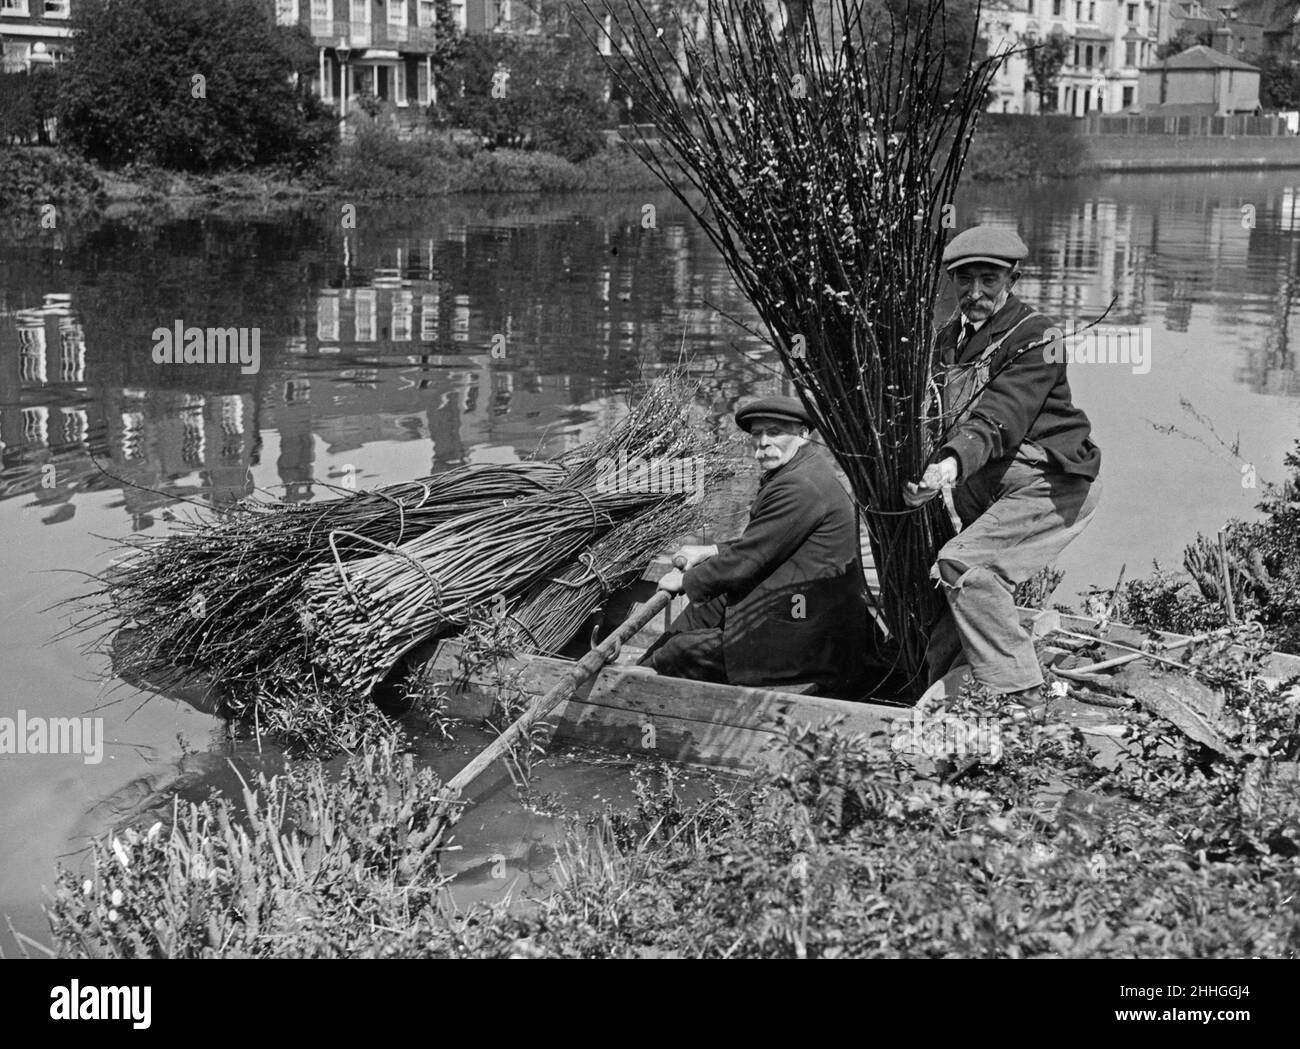 Reed Cutting on the Thames 1st May 1927Within a stones throw of Chiswick church, not far from Hammersmith Bridge is a small island in the River Thames. Here Mr John Davidson, who is the only remaining basket maker in the City of London, makes an annual visit, to cut and collect osiers which grow on the island. These osiers are used in his trade, mostly making Billingsgate fish baskets. Stock Photo